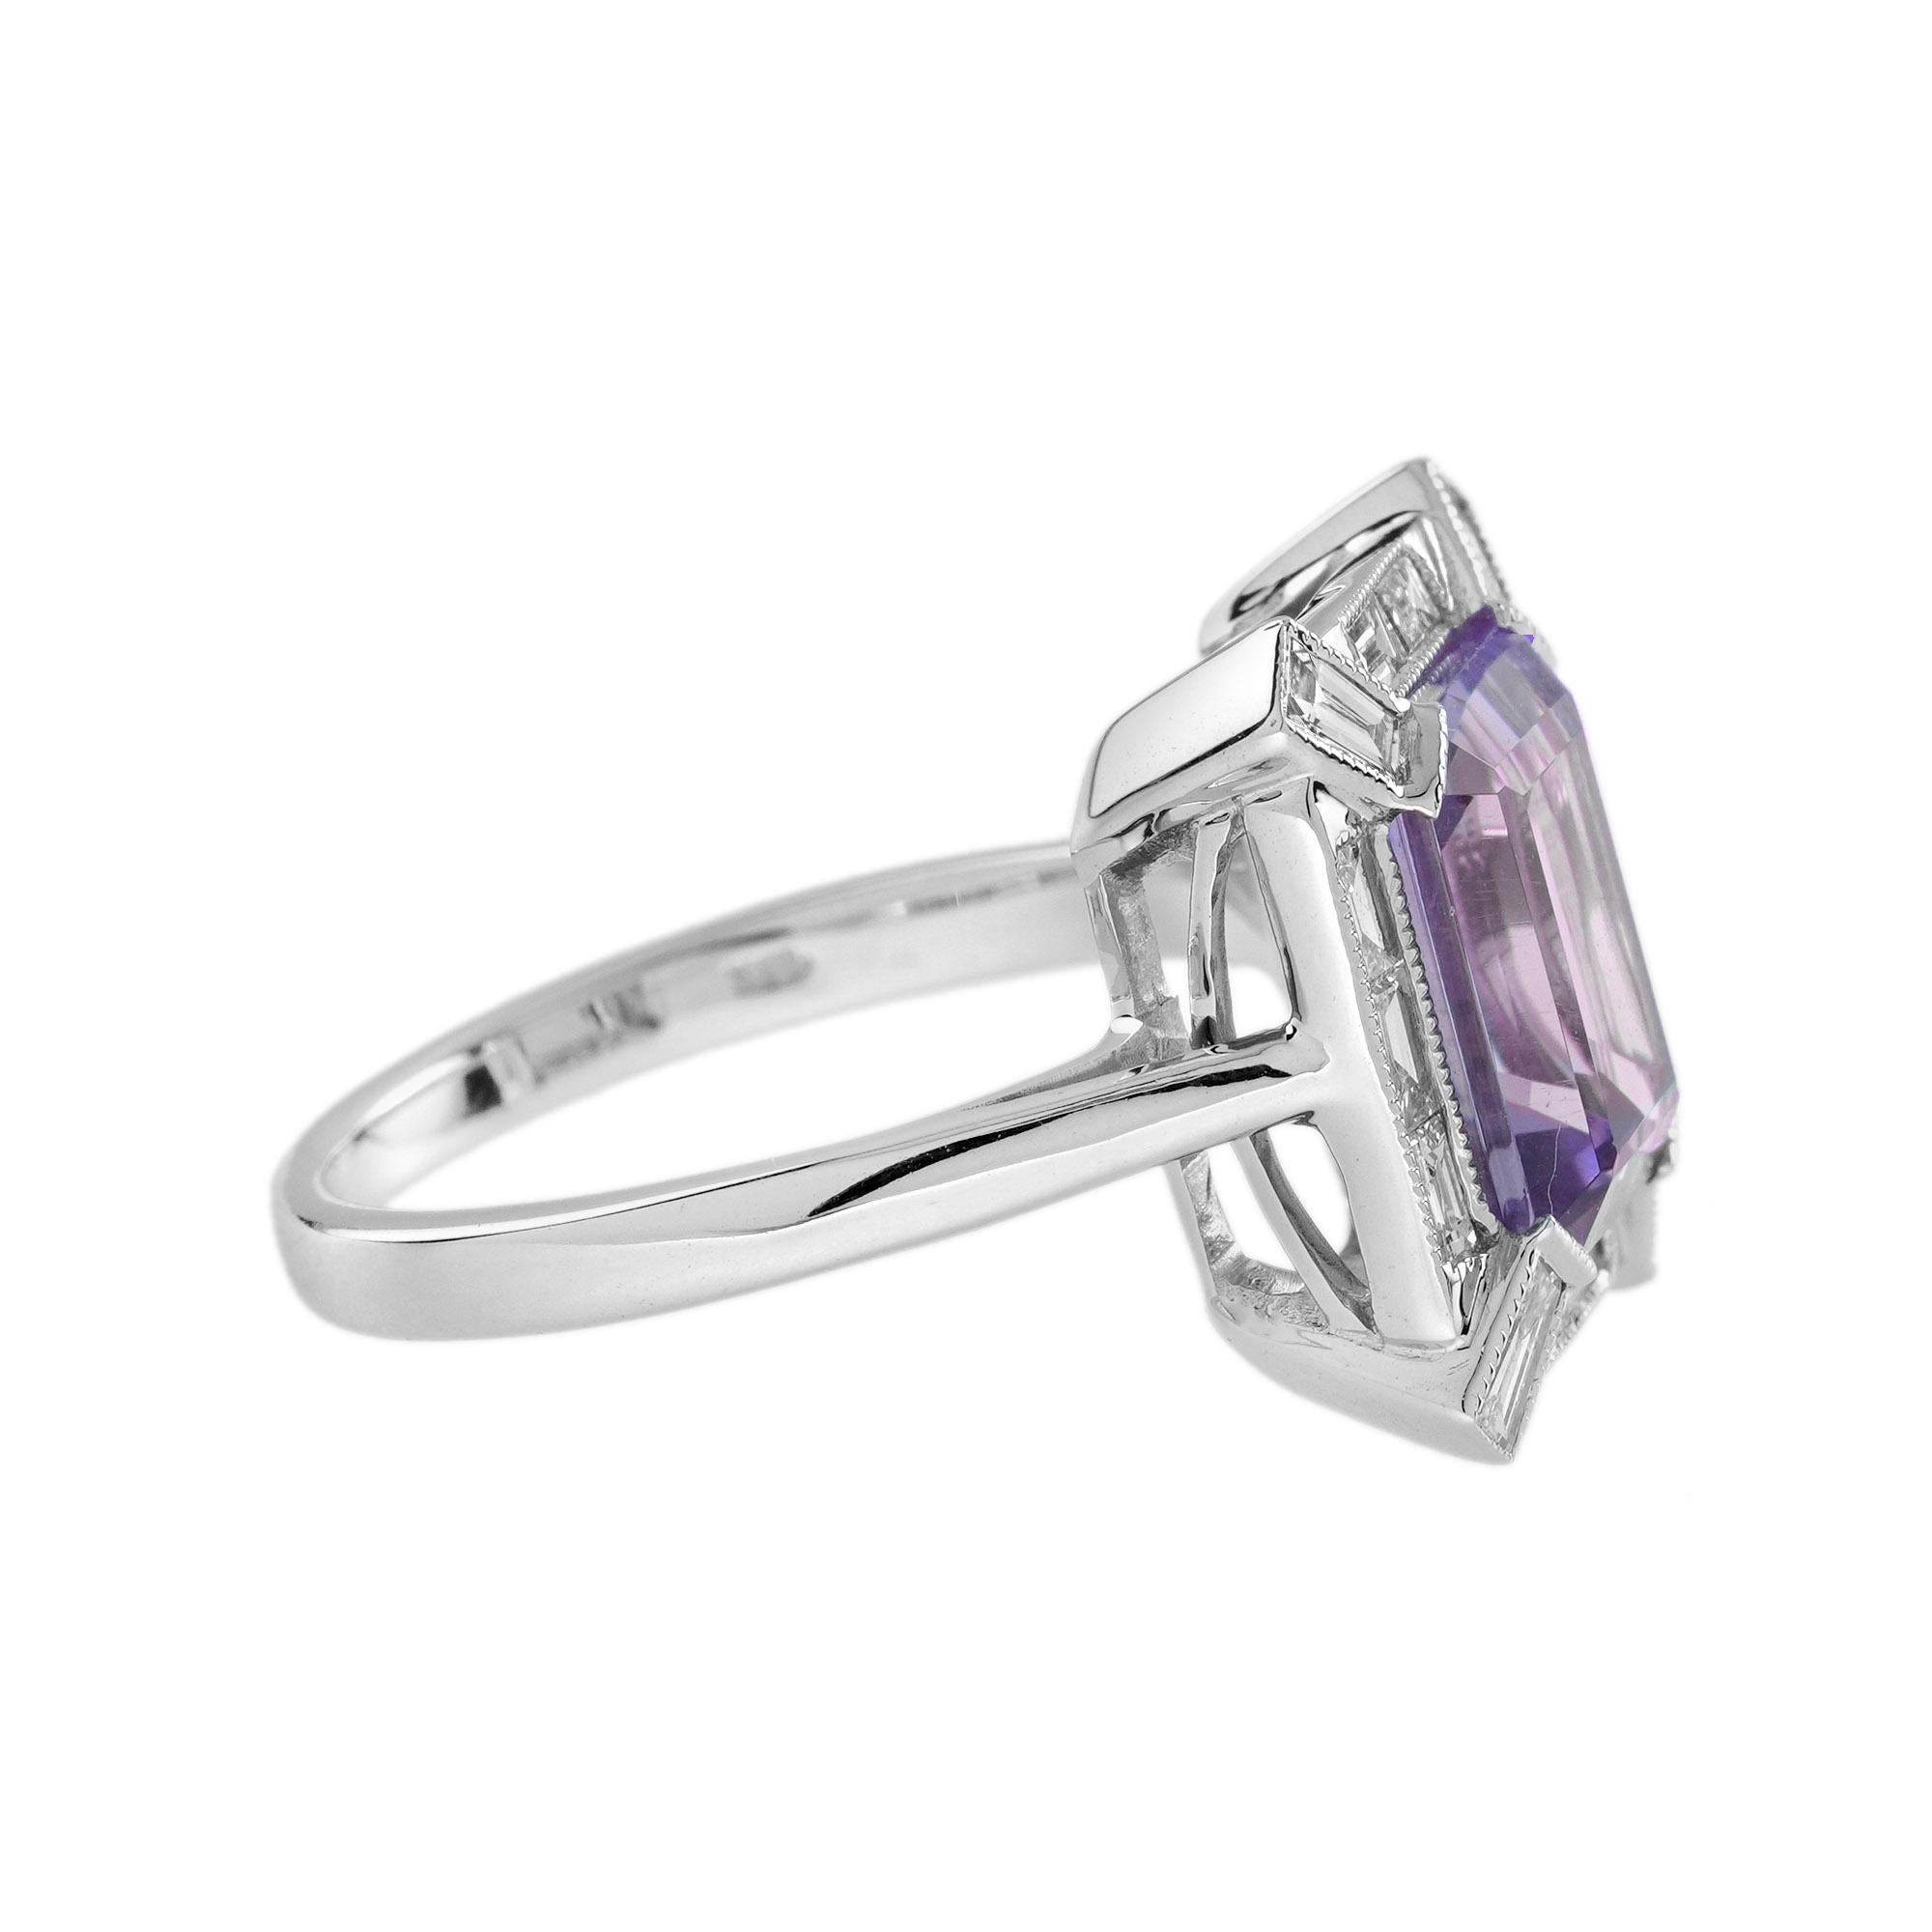 Women's Emerald Cut Pink Amethyst and Diamond Halo Art Deco Style Ring in 14K White Gold For Sale